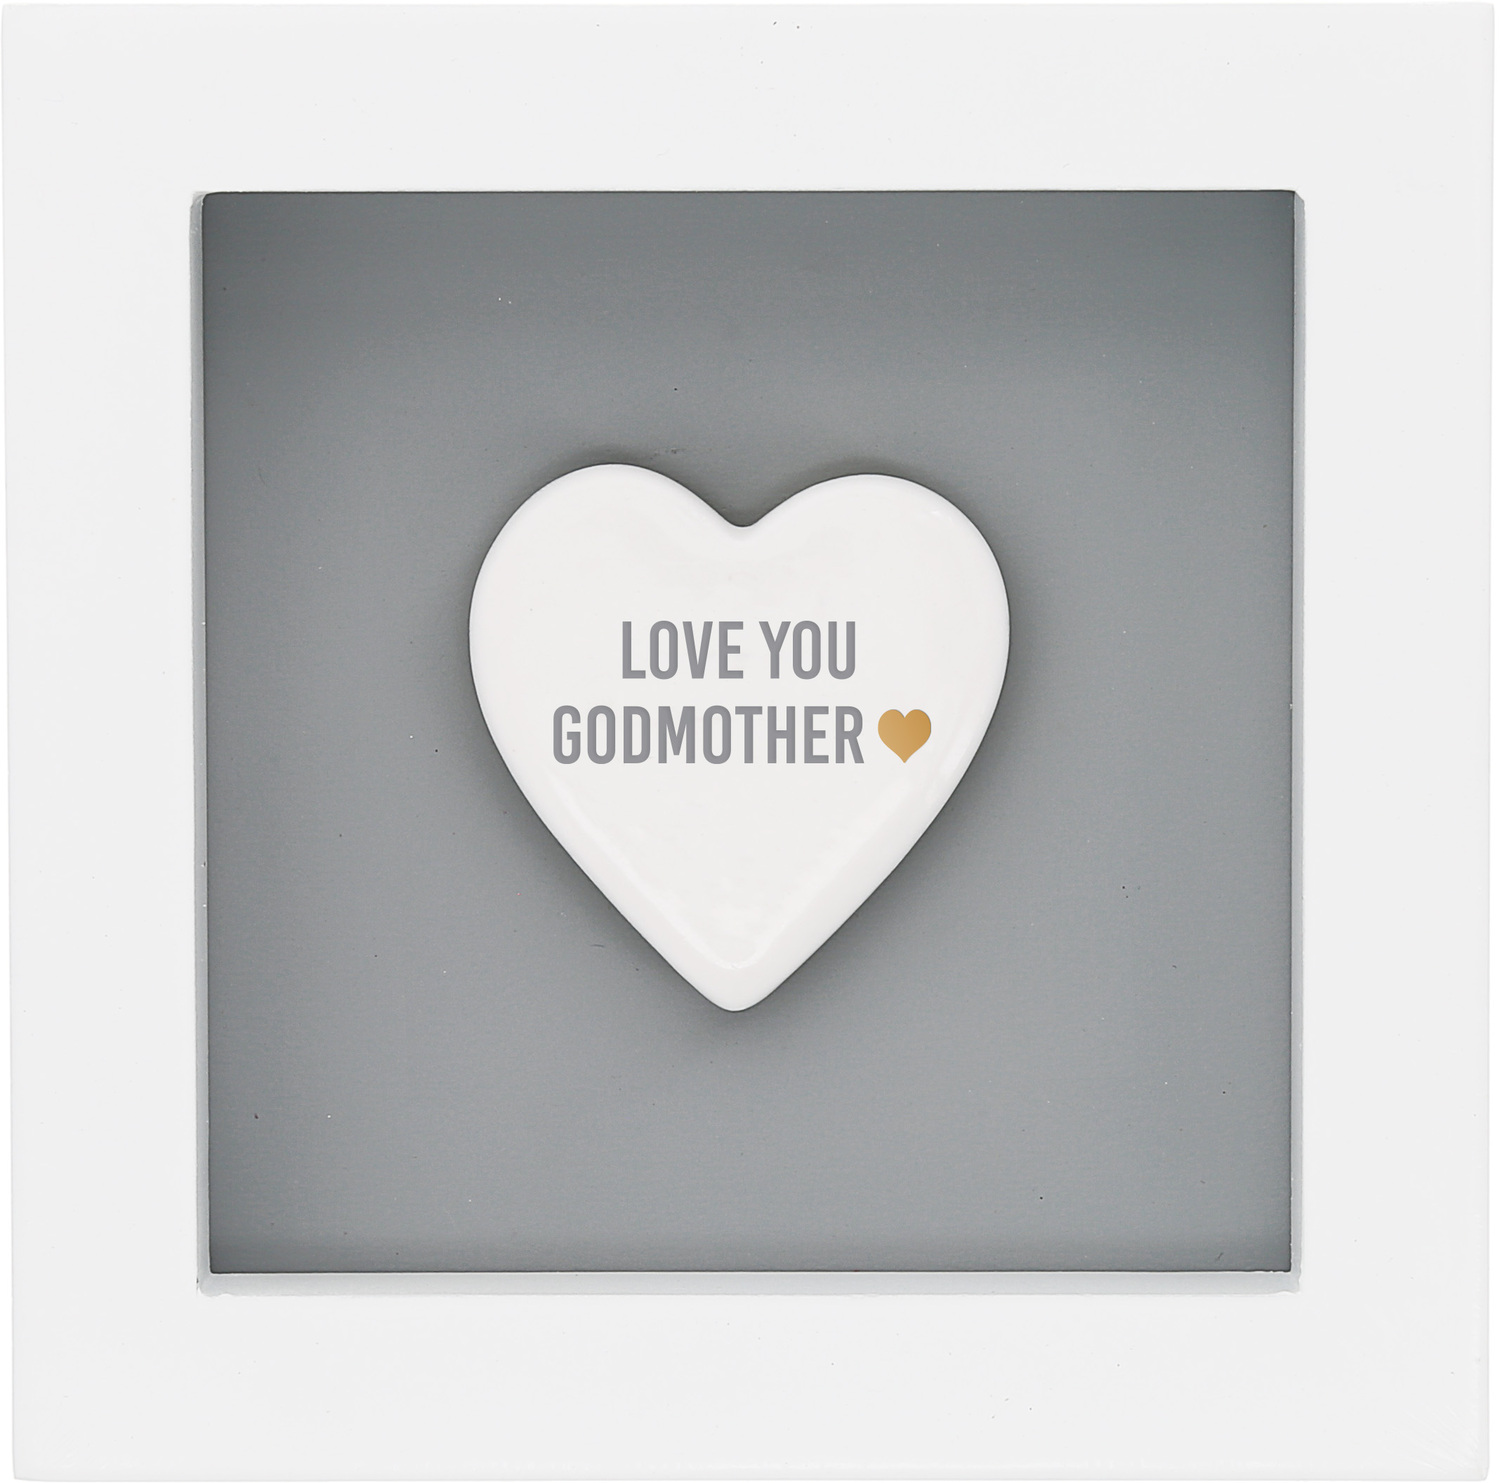 Love You Godmother by Said with Love - Love You Godmother - 4.75" Plaque